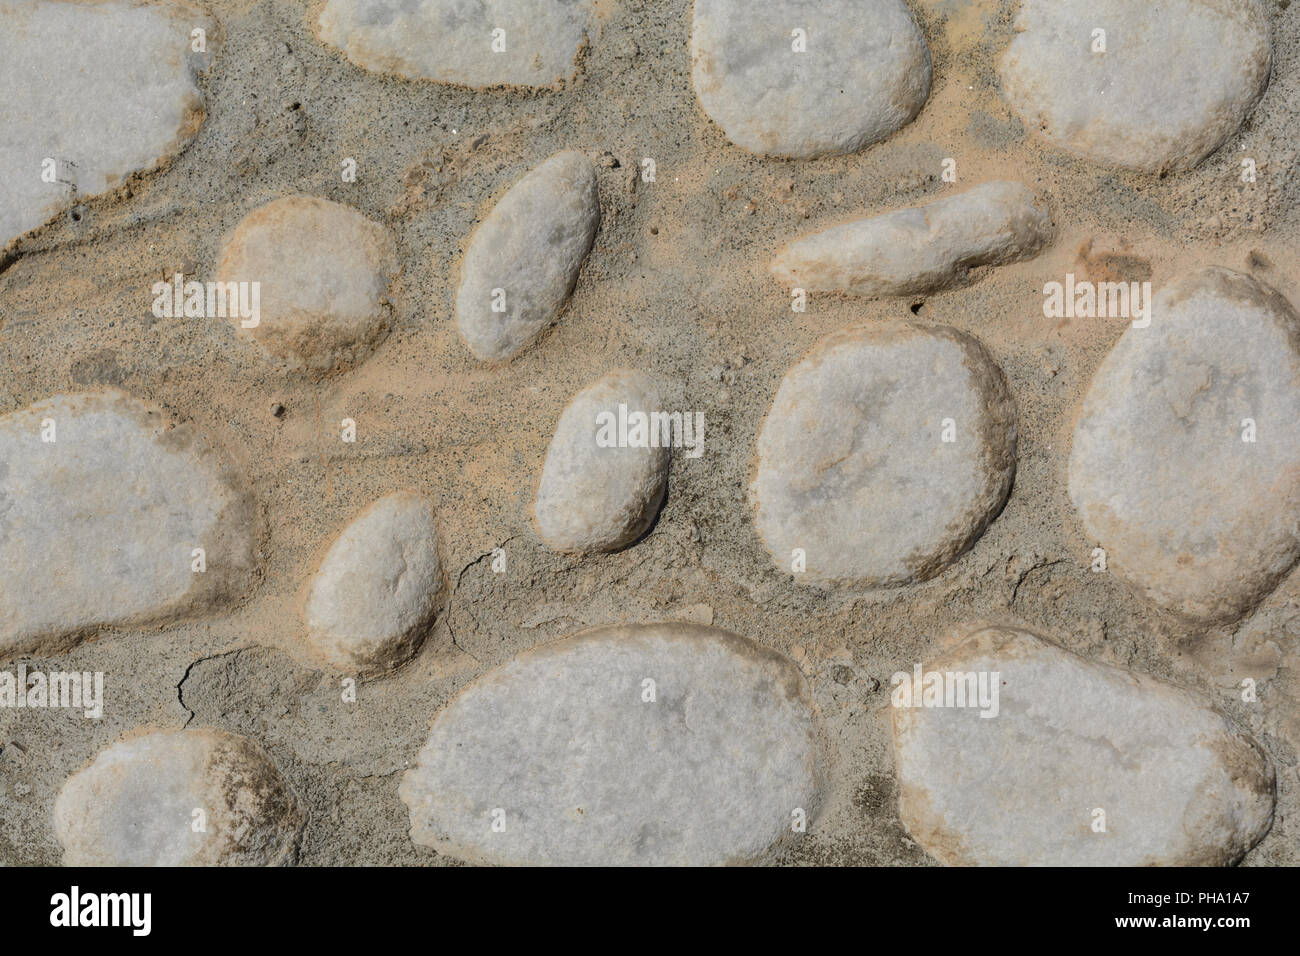 Boulders give patterns as a background Stock Photo